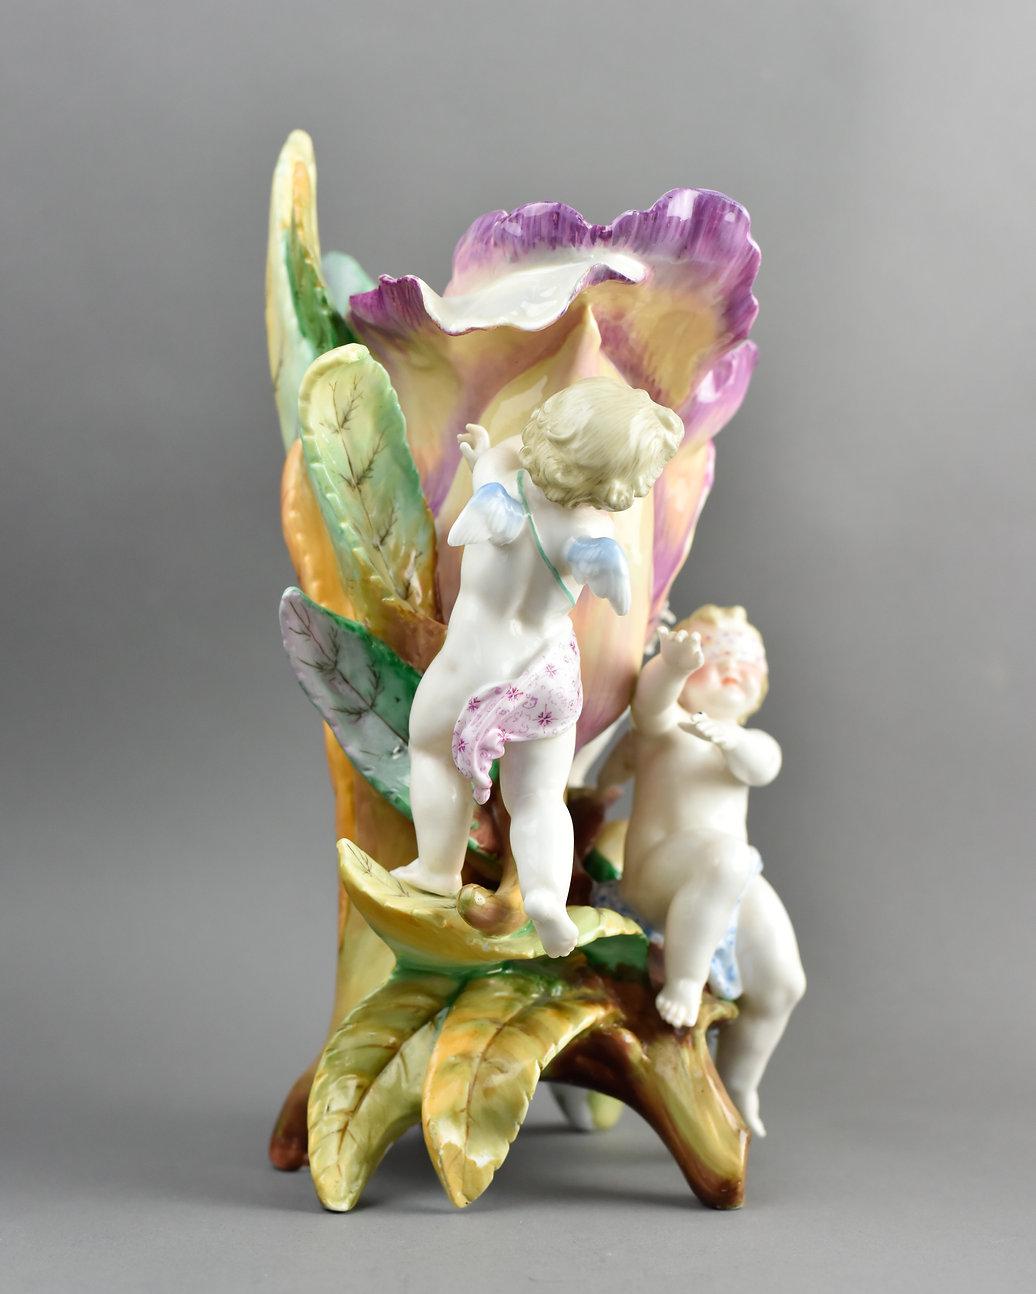 Antique porcelain centrepiece vase group by Kister Scheibe-Alsbach
Depicting hide-and-seek cherubs around a tulip flower vase
Marked on base KPM
Kister porzellan manafaktur Scheibe-Alsbach circa 1887-1905
Excellent condition - Germany.